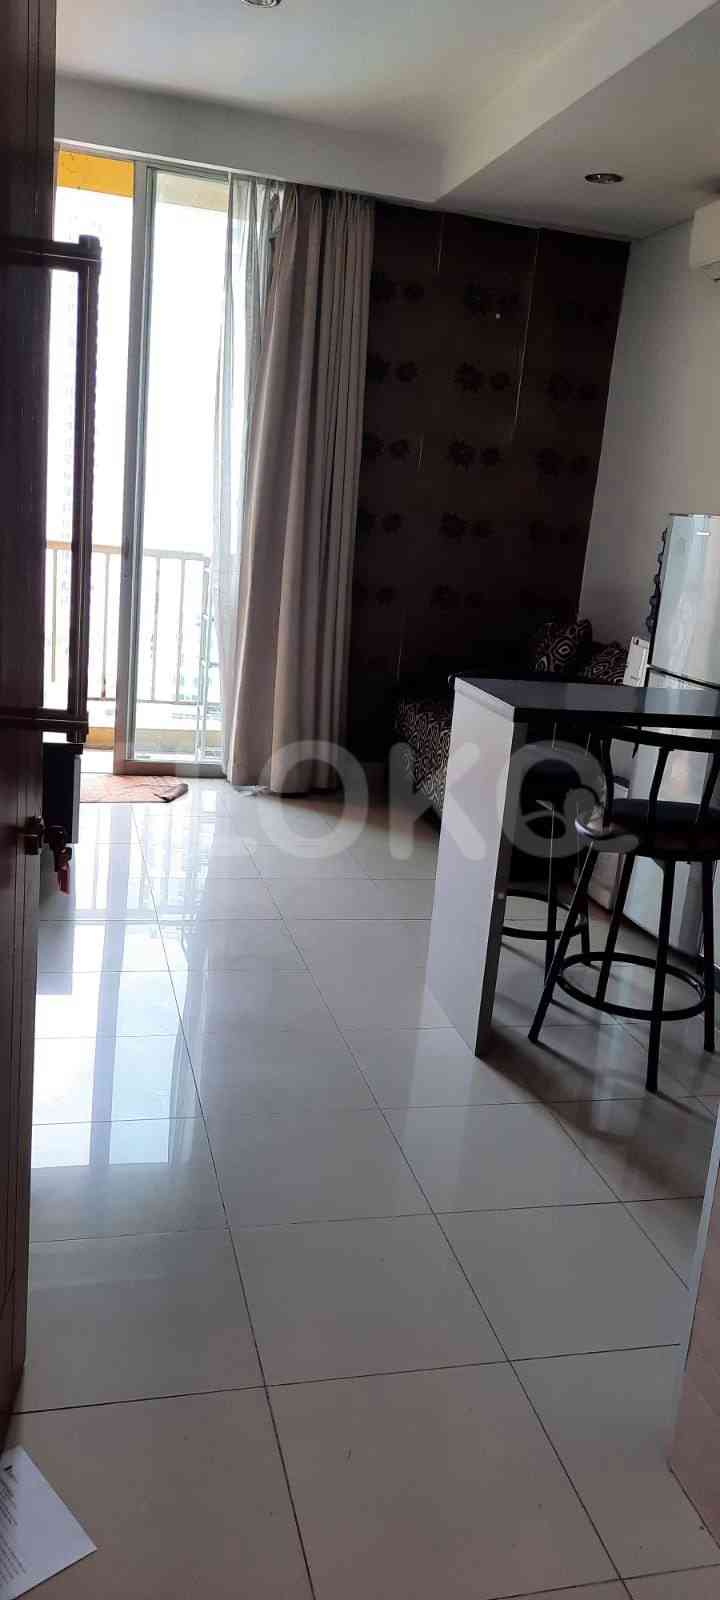 1 Bedroom on 15th Floor for Rent in Kuningan Place Apartment - fkud9c 4